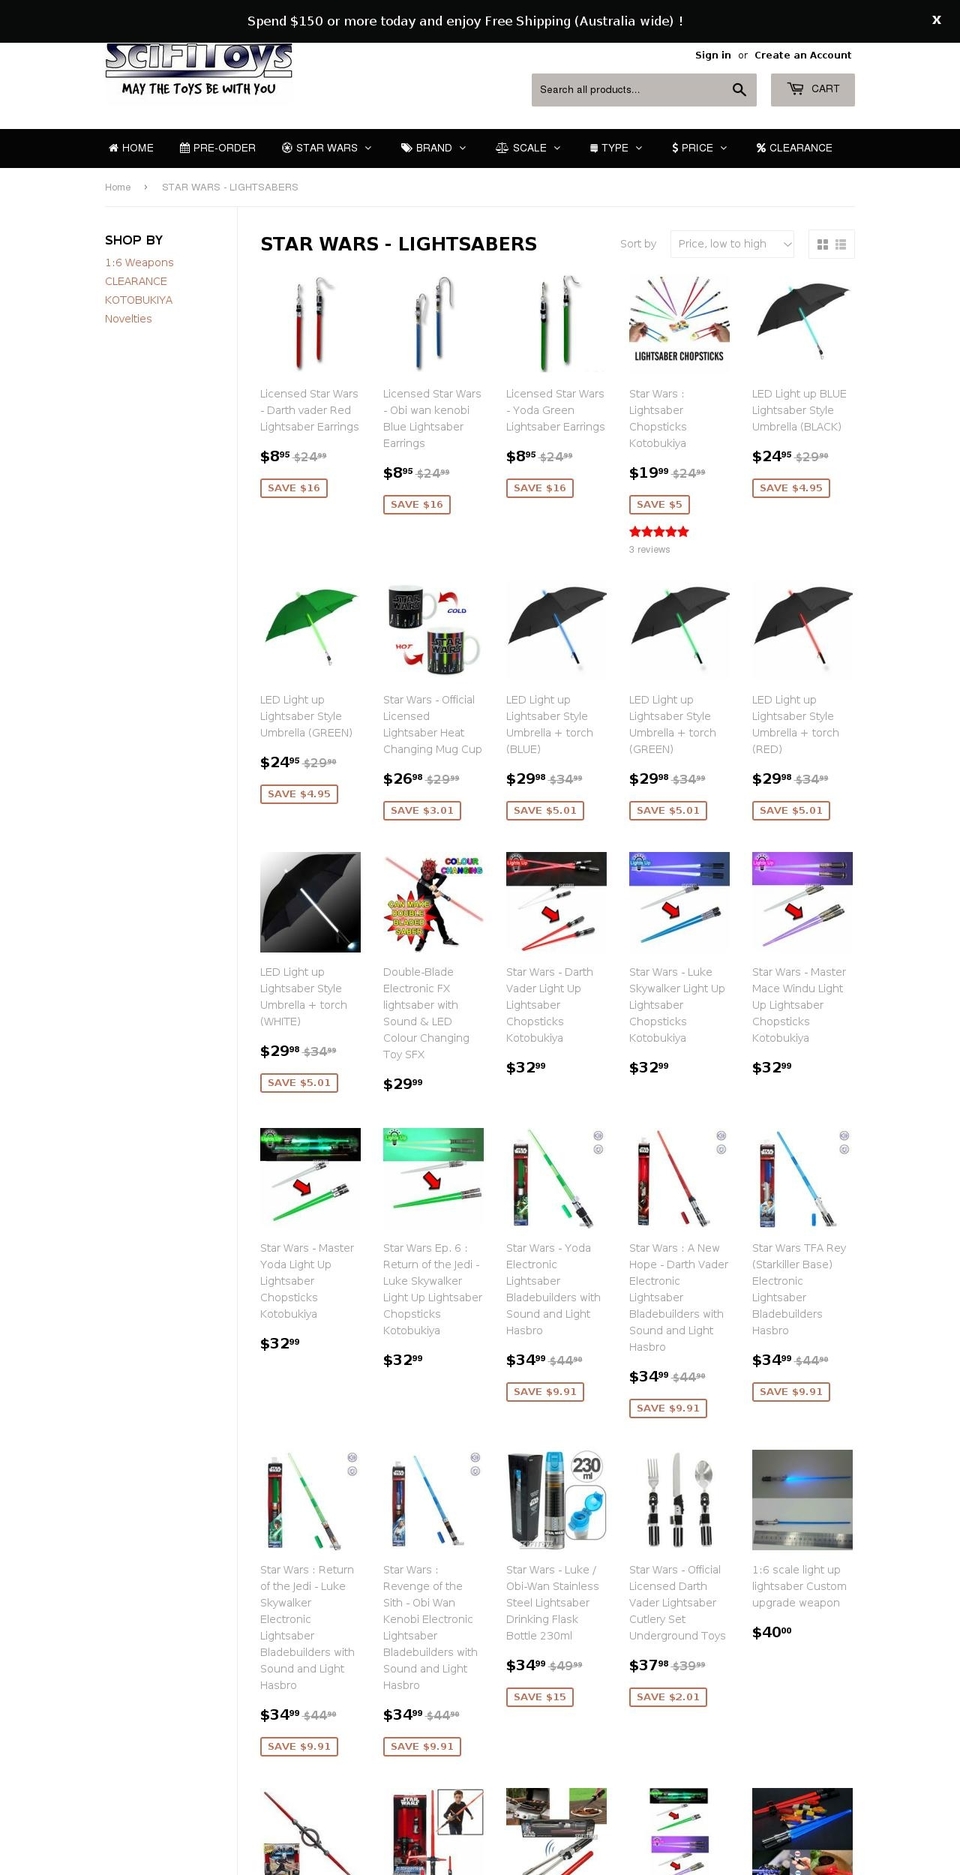 Scifitoys 1ST (supply) Theme changed liquid 4 BOLD Shopify theme site example lightsabersonline.com.au